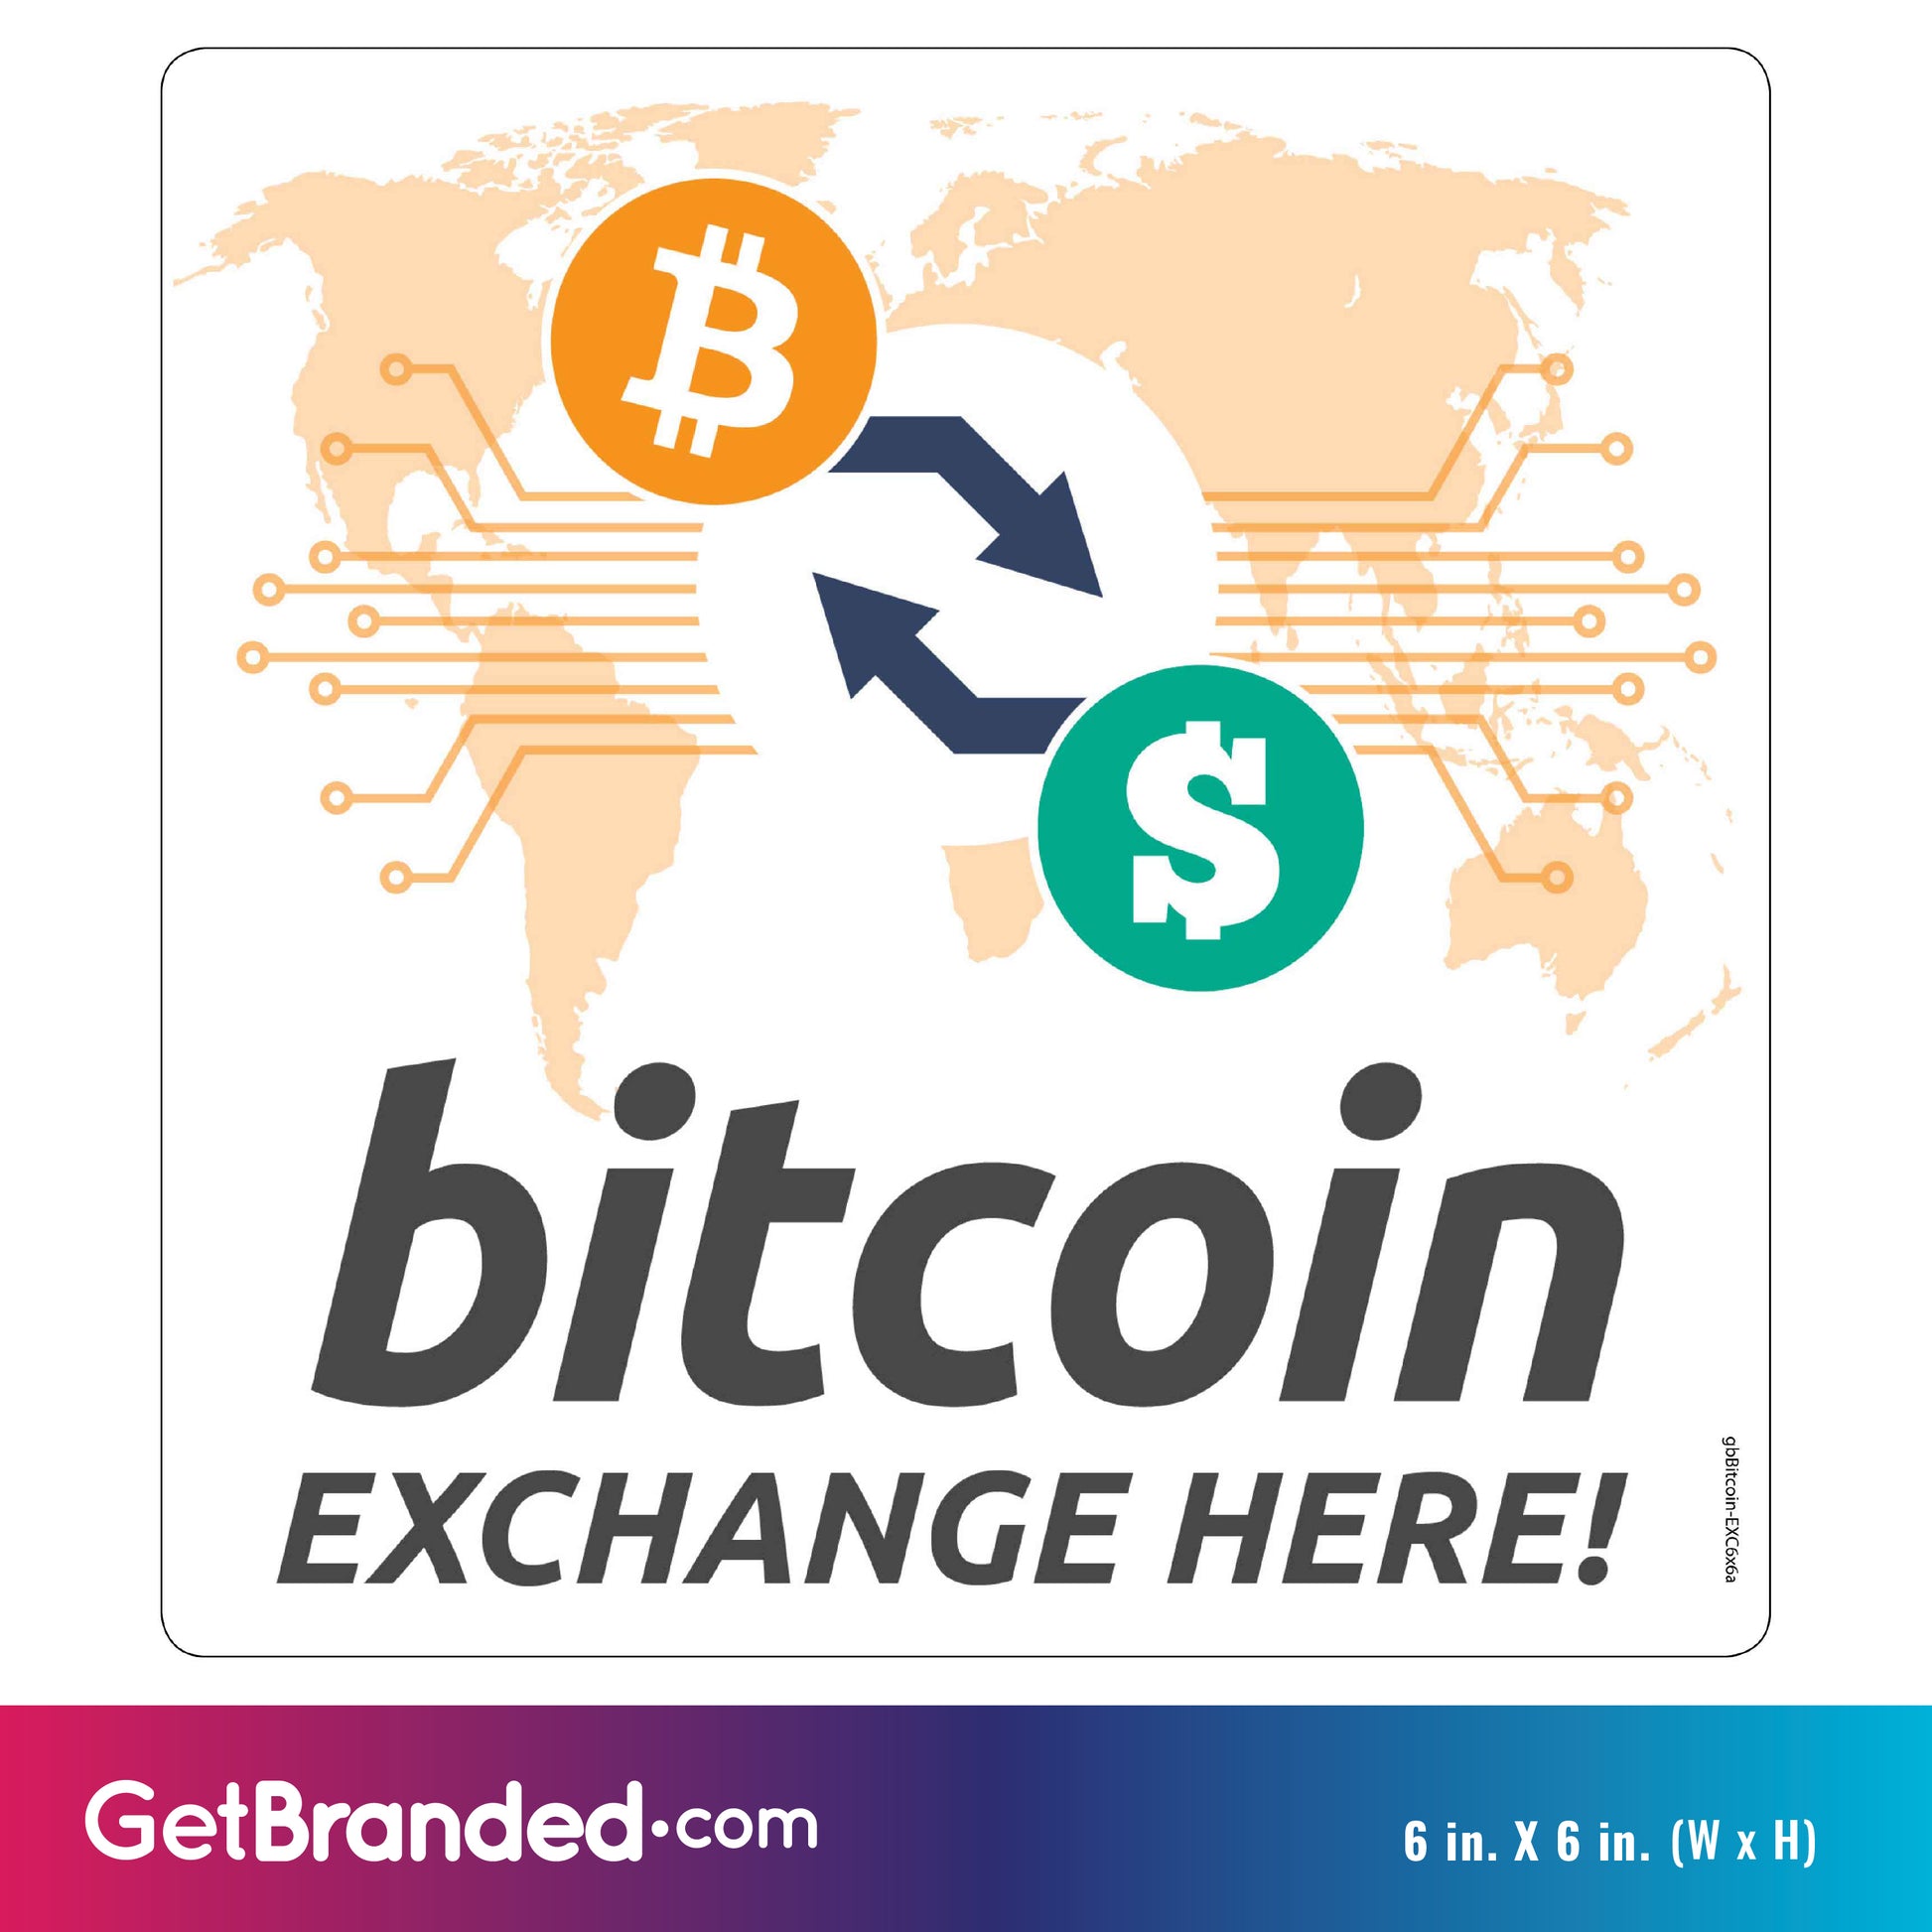 Bitcoin Exchange Here Decal size guide. 6 inches by 6 inches in size.